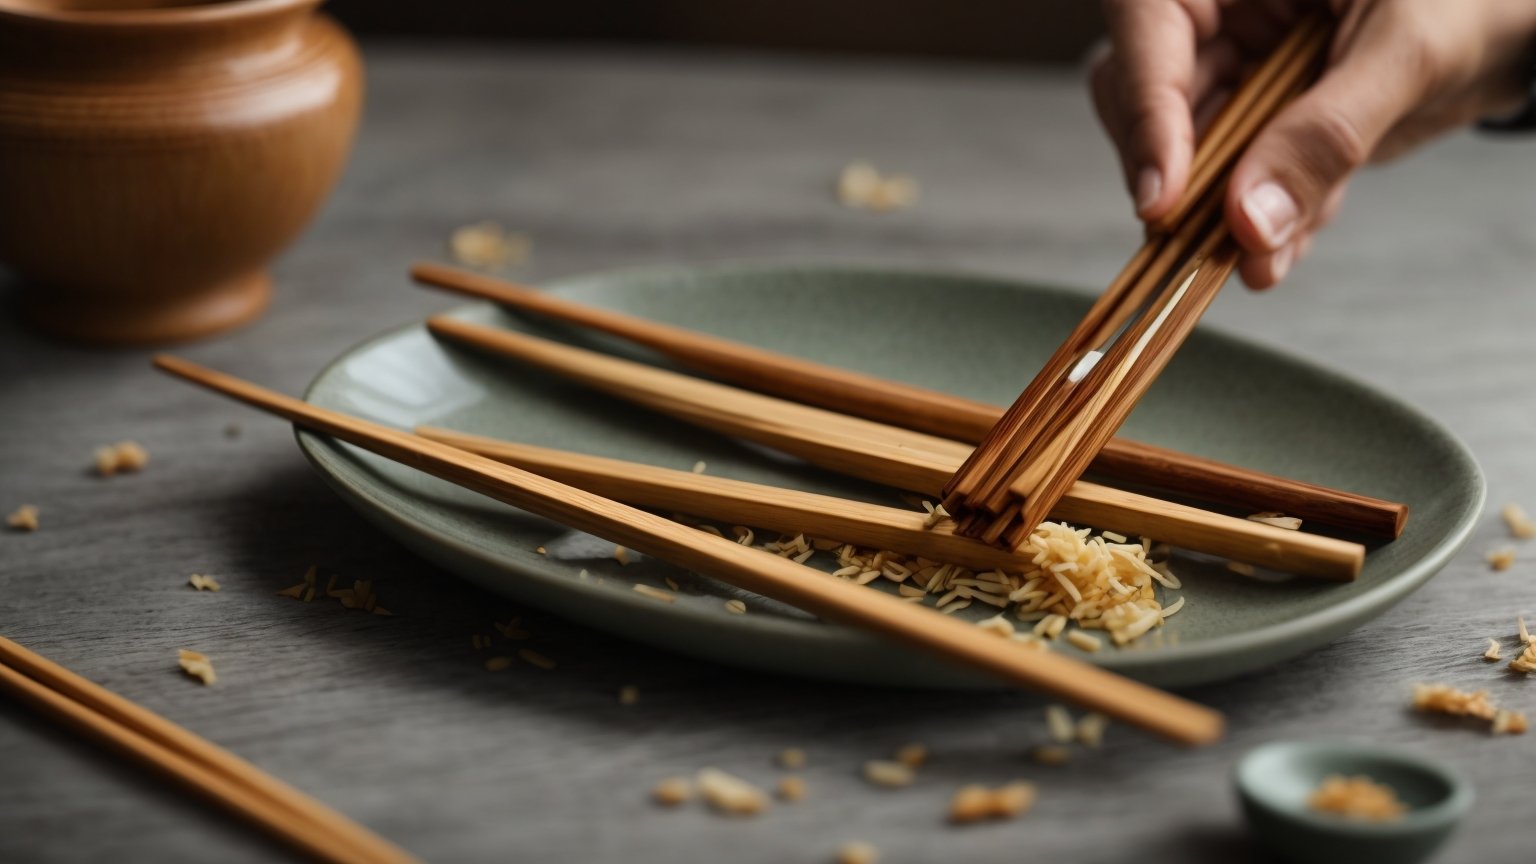 how-to-clean-wooden-chopsticks-simple-tips-for-spotless-utensils-2